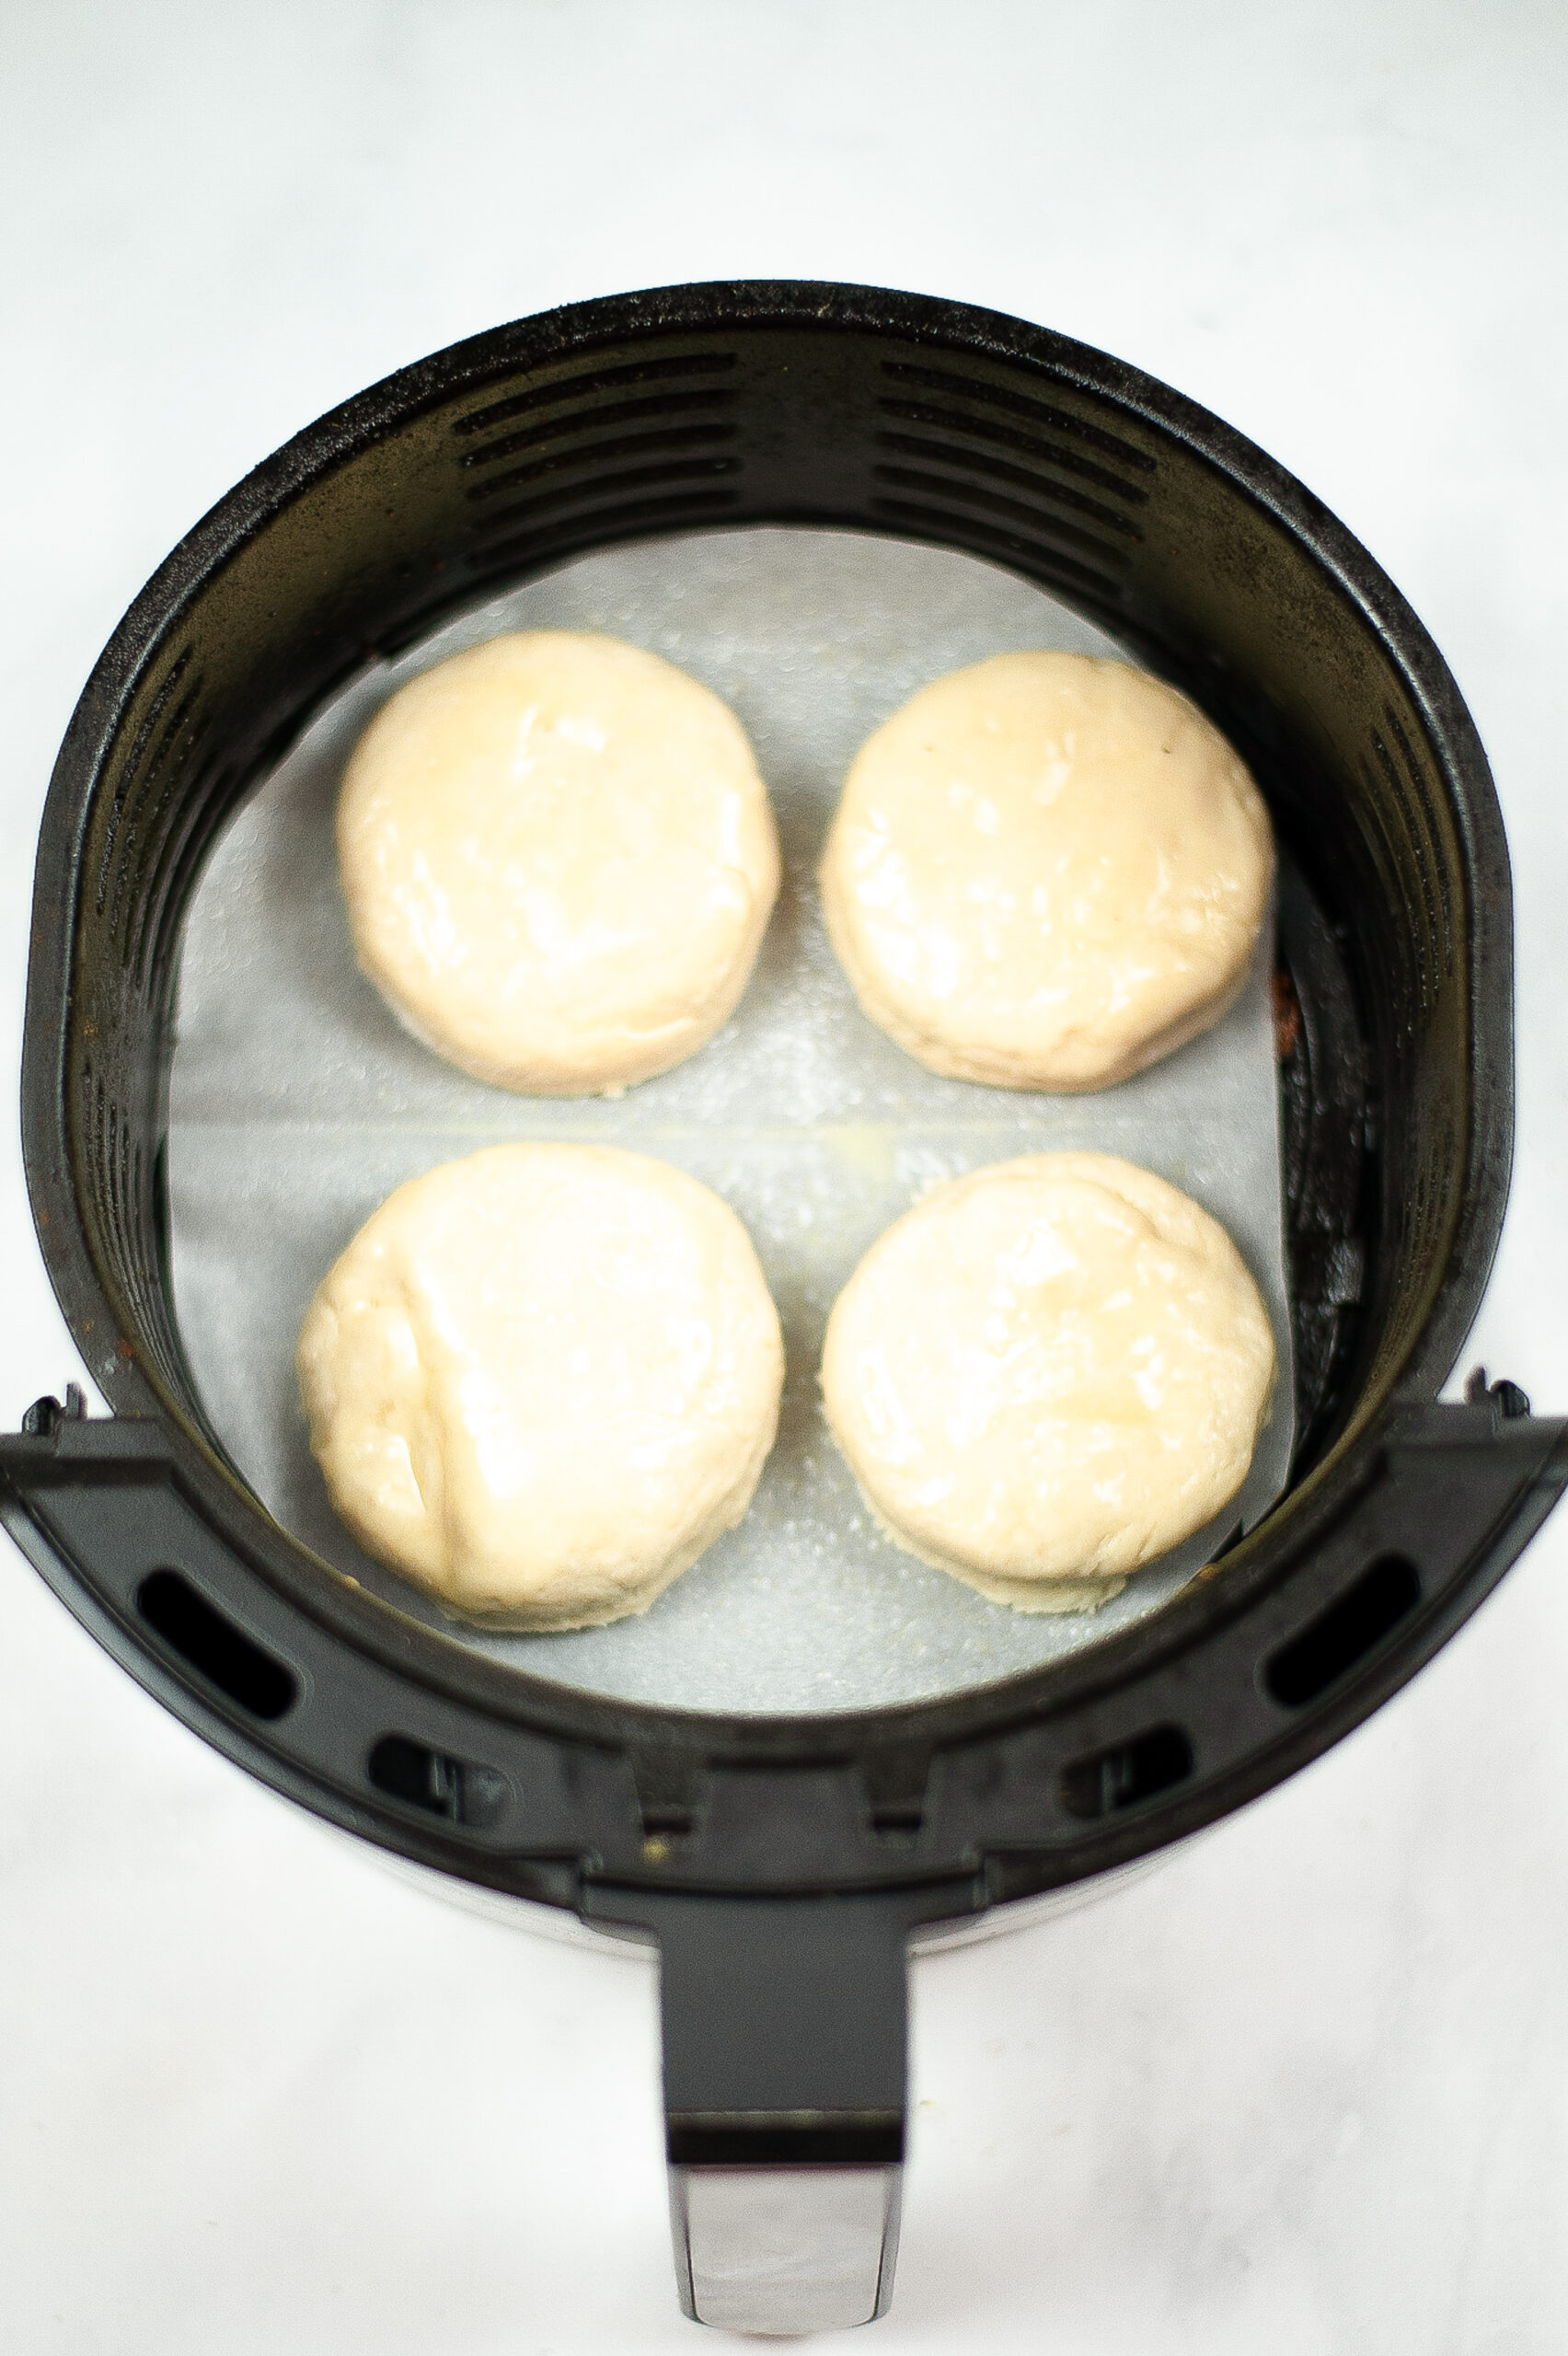 biscuits in air fryer